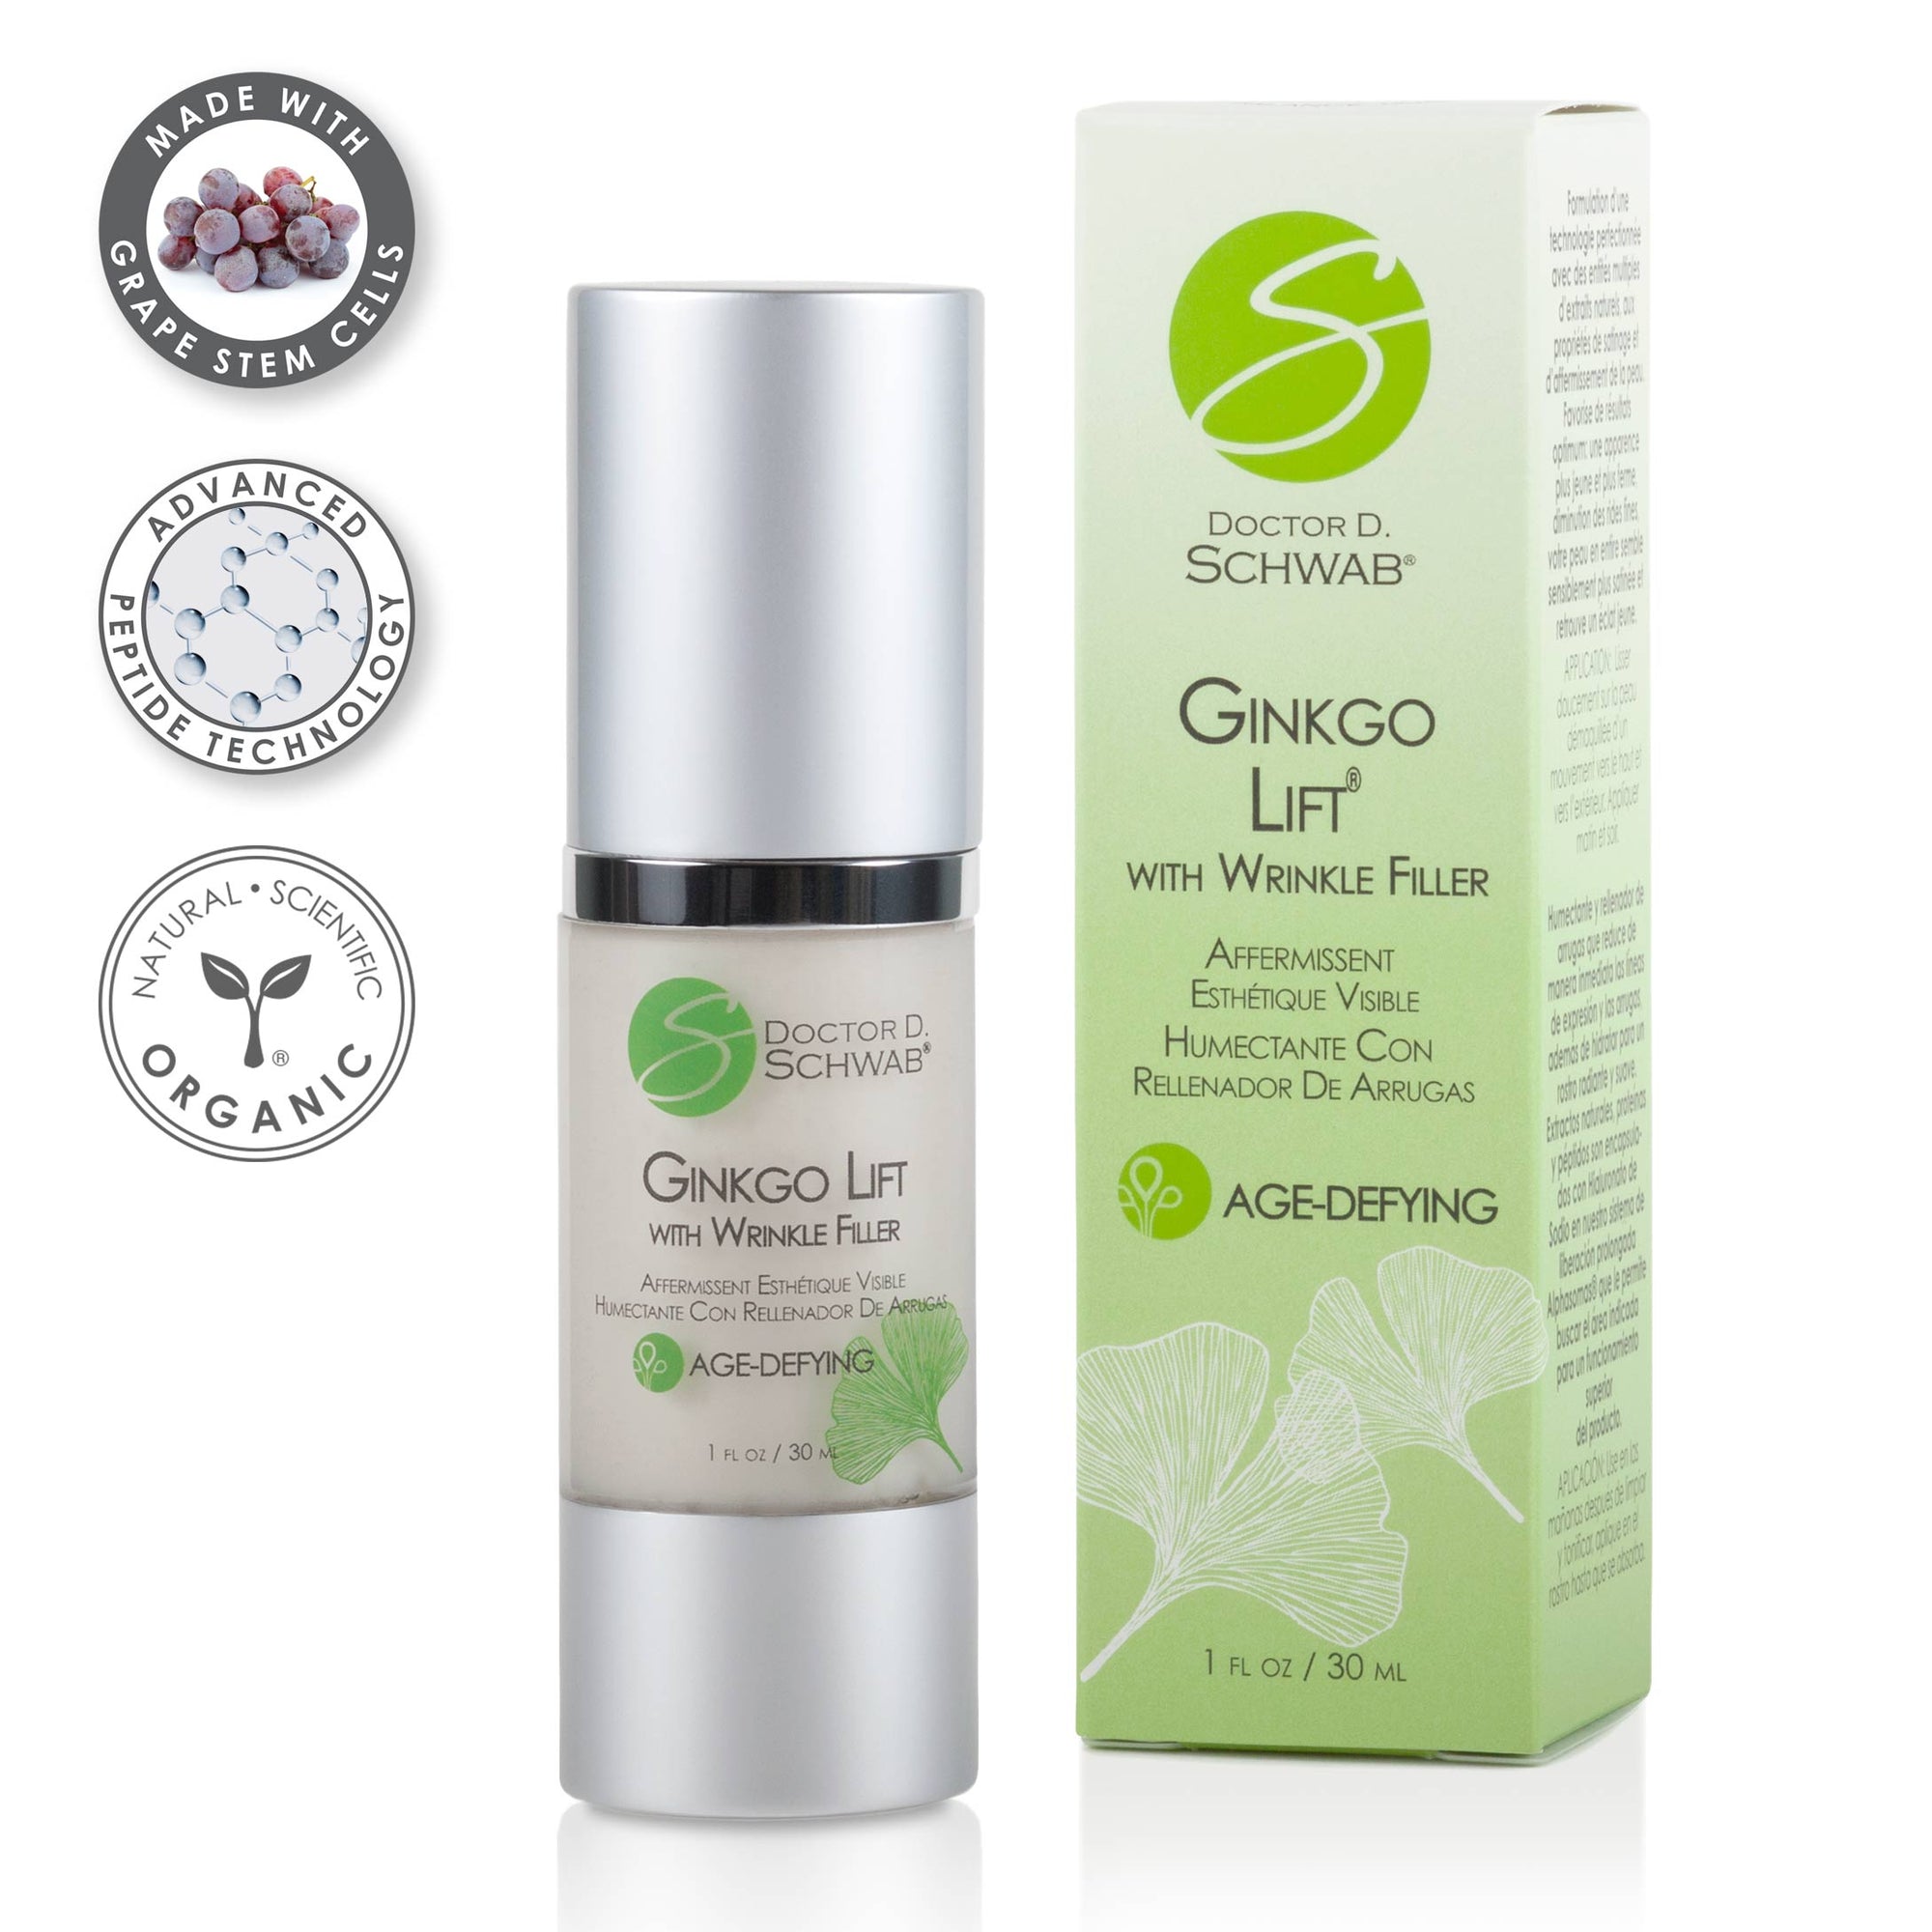 Ginkgo Lift® with Wrinkle Filler - Firming, Lifting, Age-Defying Moisturizer